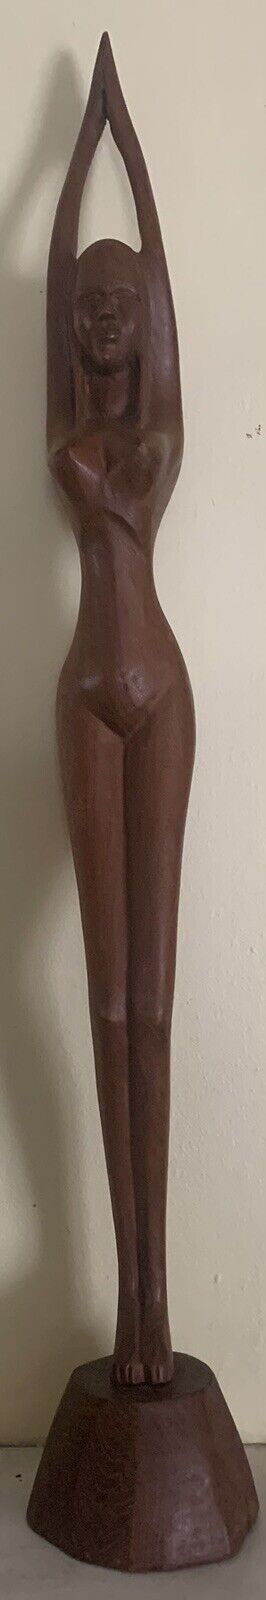 Vintage Hand Carved Wooden Nude Woman